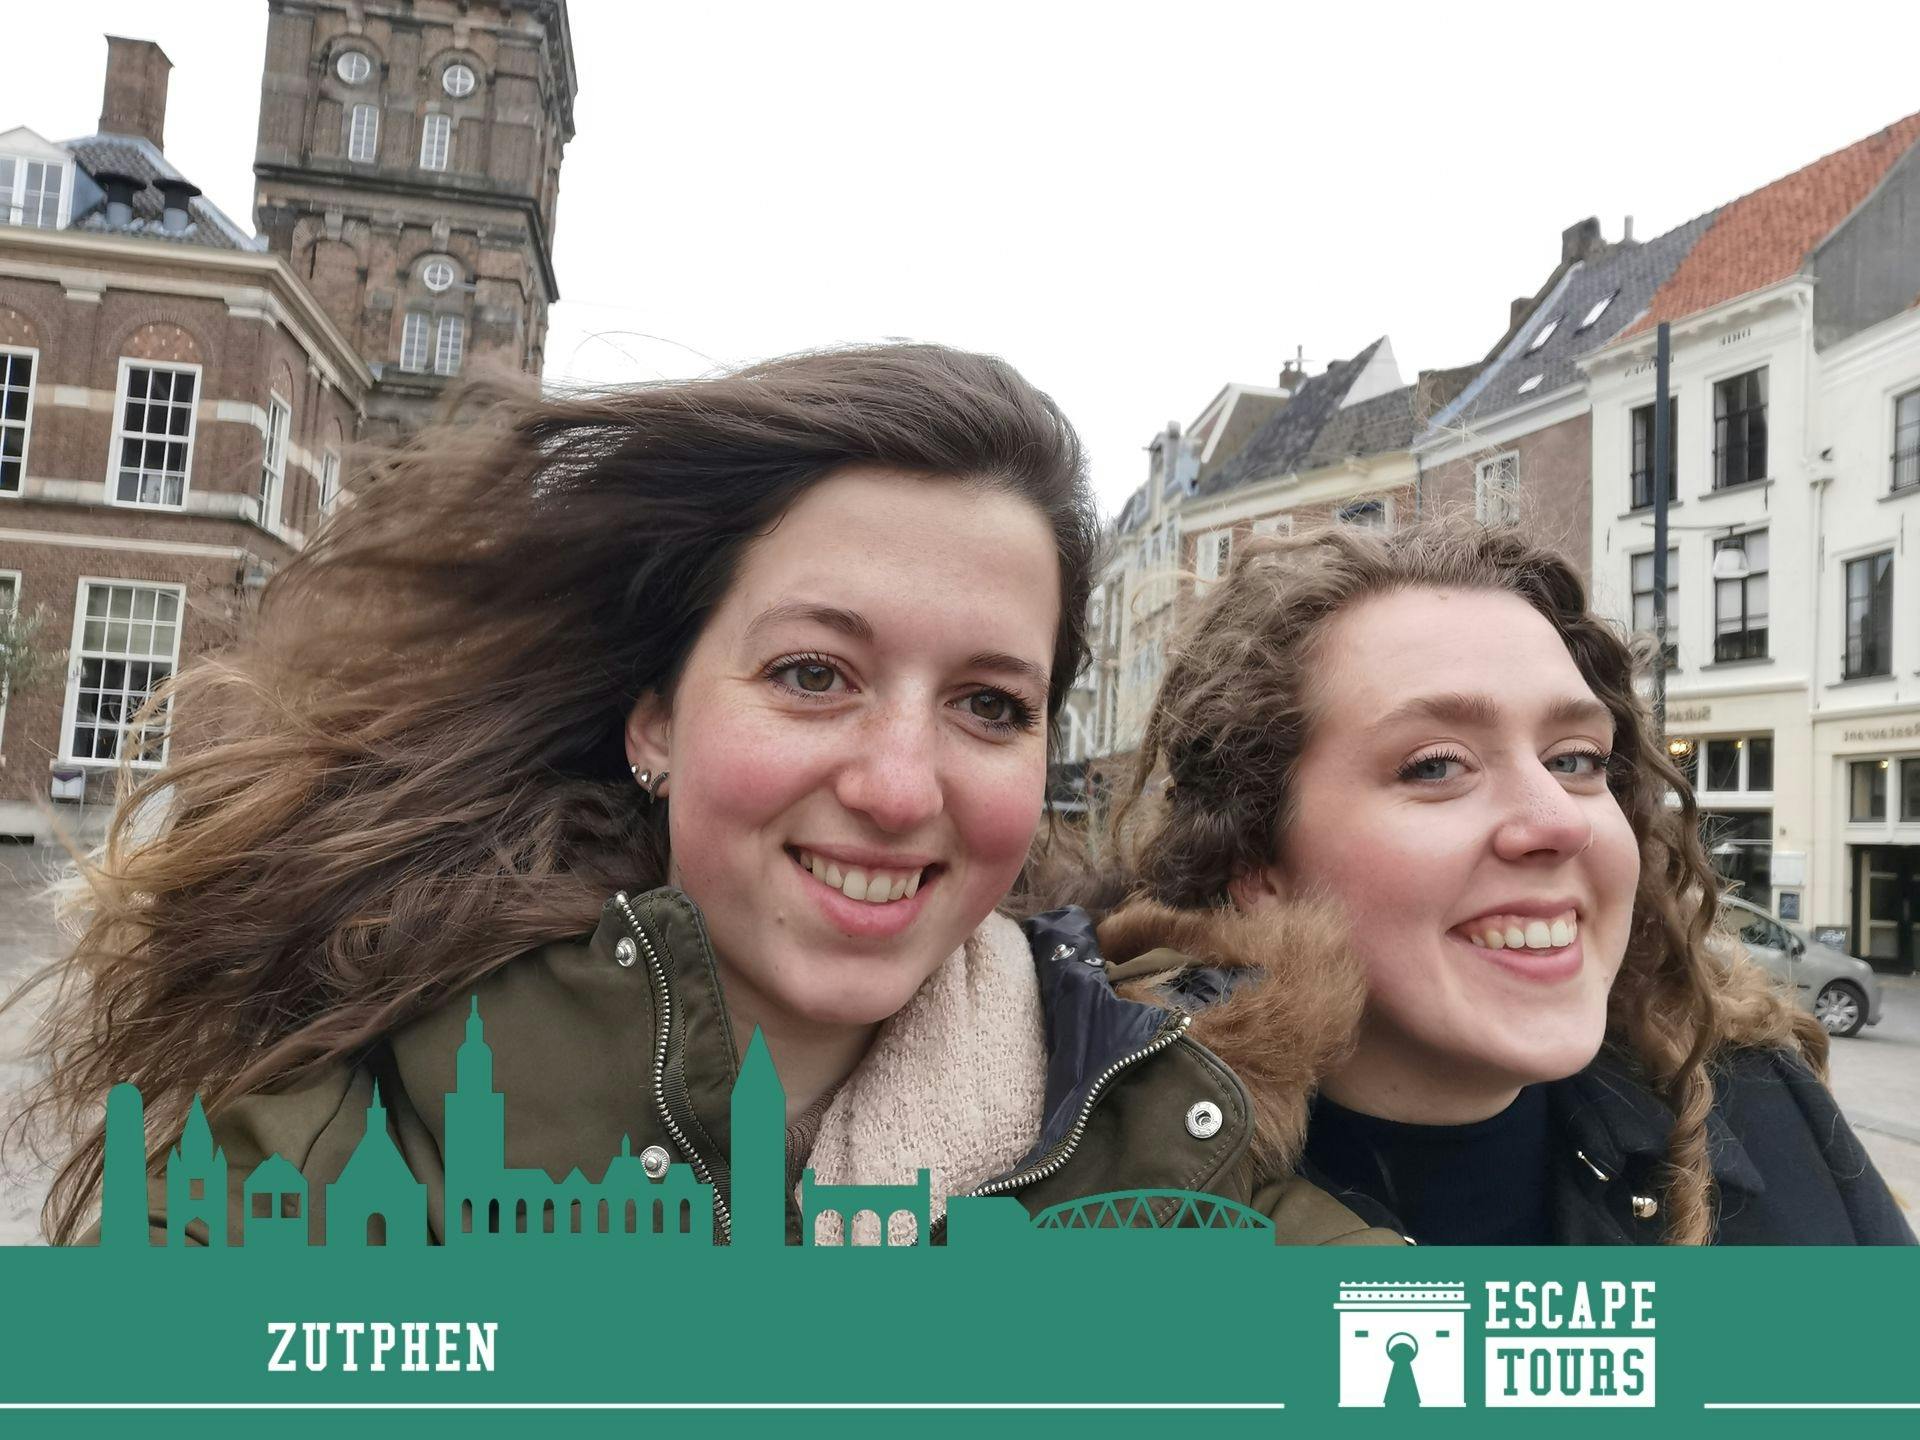 Escape Tour self-guided, interactive city challenge in Zutphen